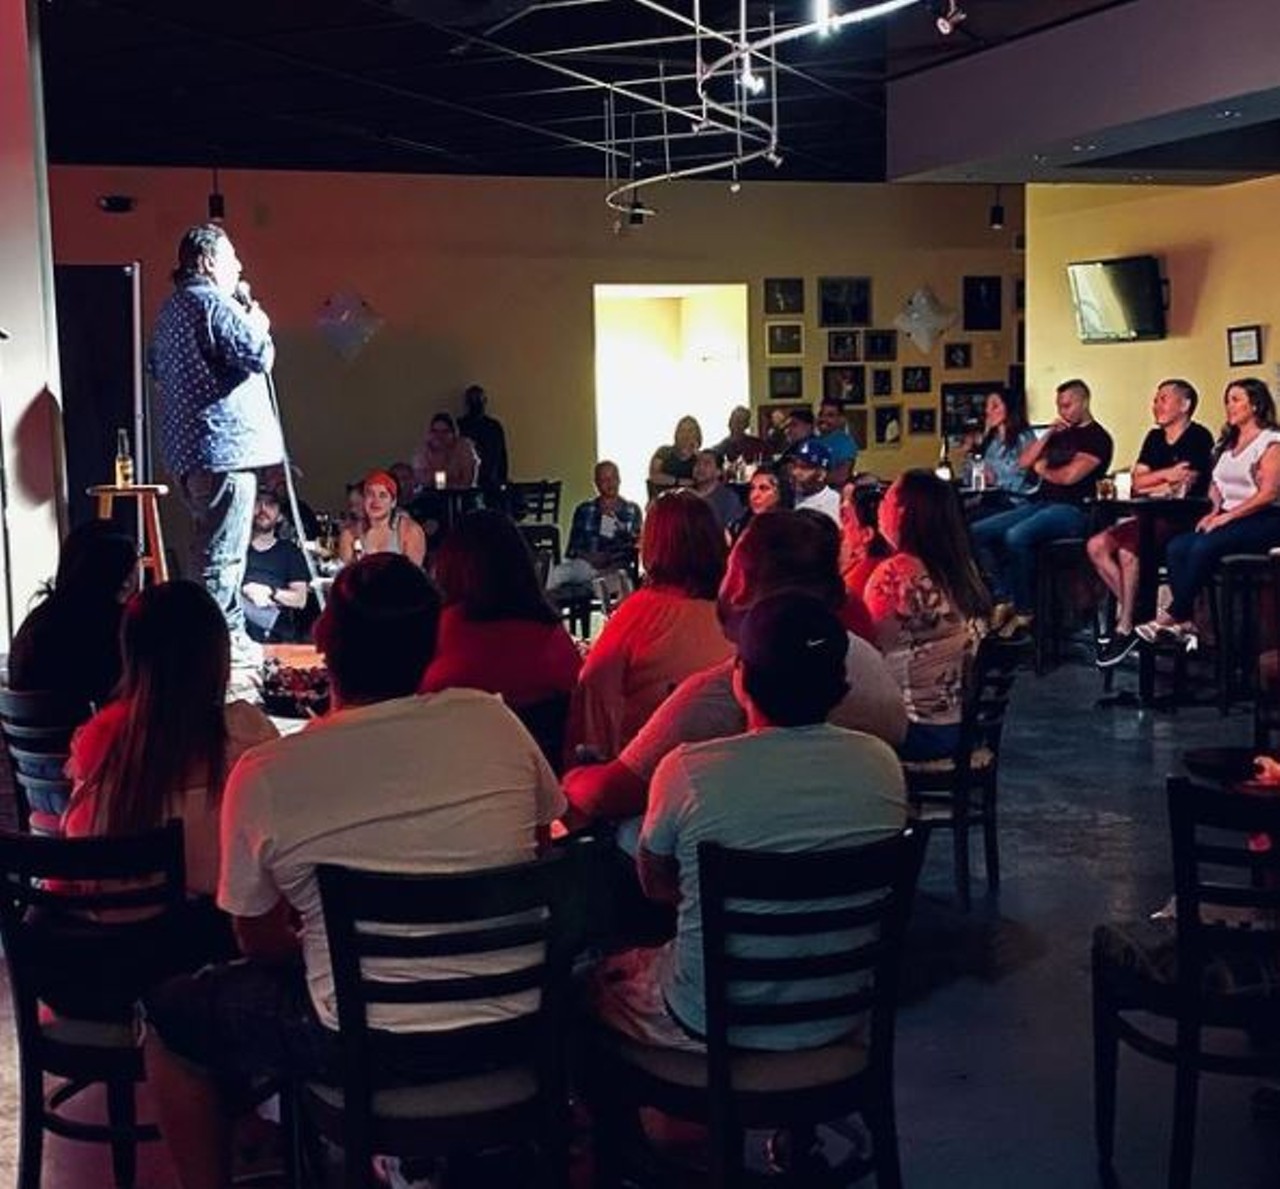 Laugh aloud at LOL Comedy Club’s San Antonio Showcase
618 Northwest Loop 410, (210) 541-8805, improvtx.com
Veterans and newbies take the stage at LOL Comedy Club to bring an evening of priceless comedy — literally, it’s free.
Photo via Instagram / sanantoniolol